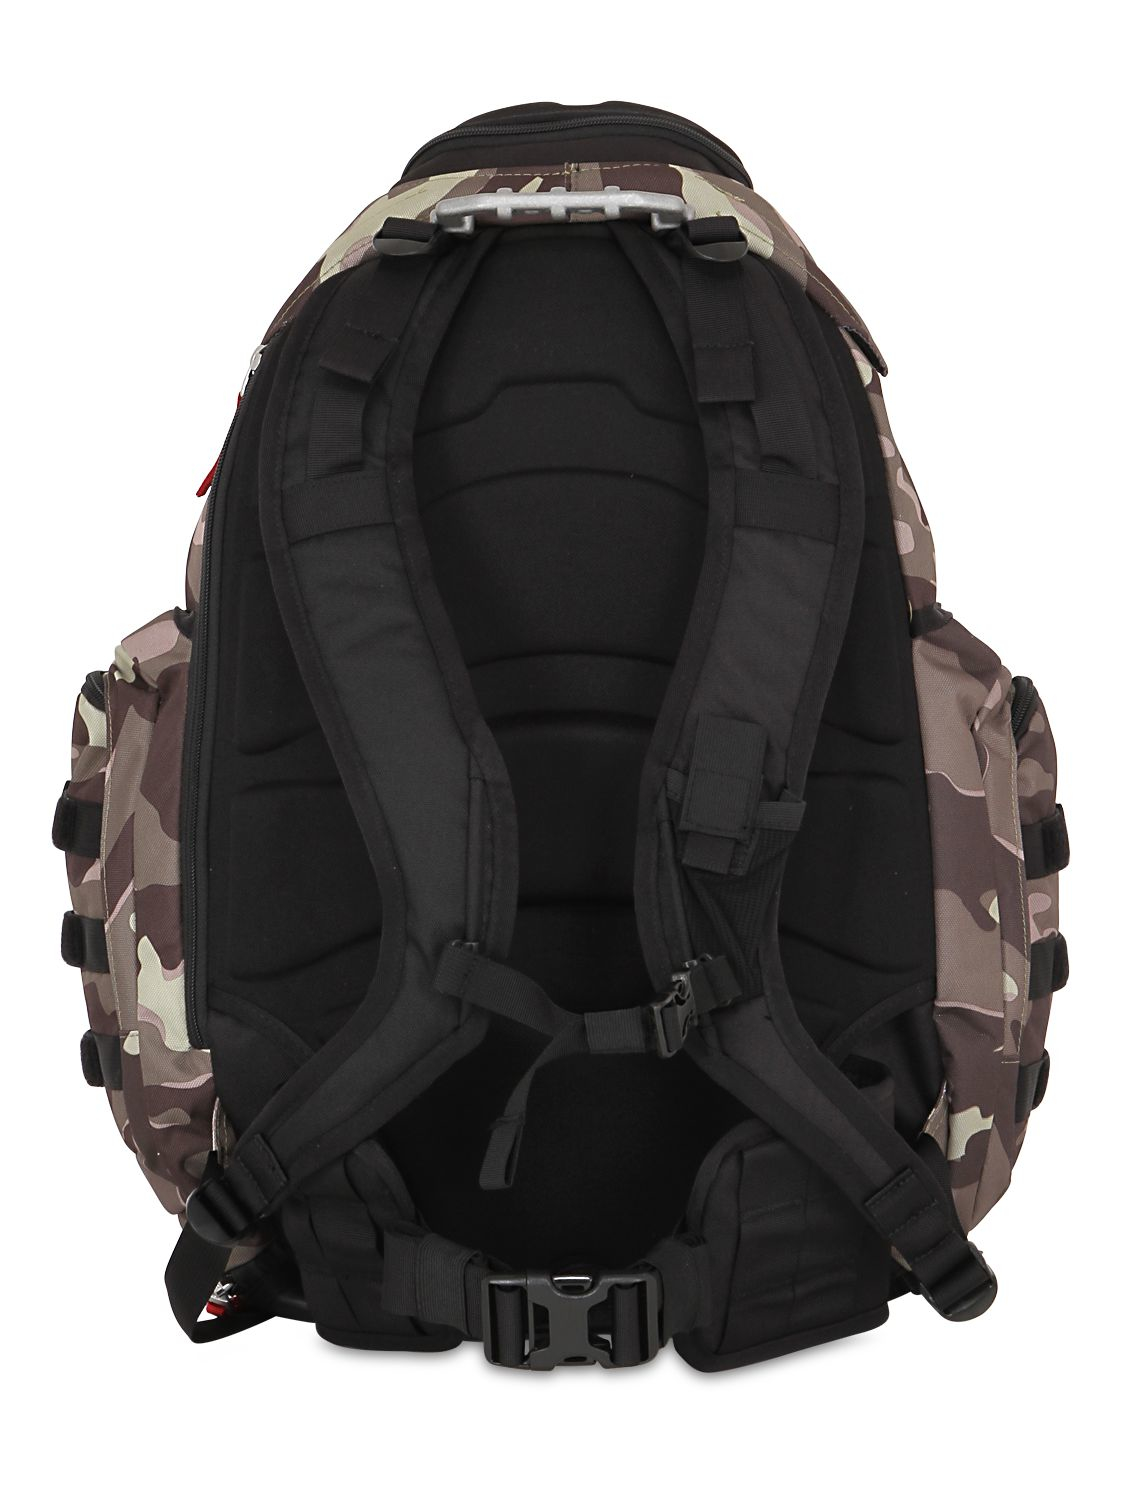 Oakley Camouflage 34l Kitchen Sink Camo Backpack Product 4 647718439 Normal 